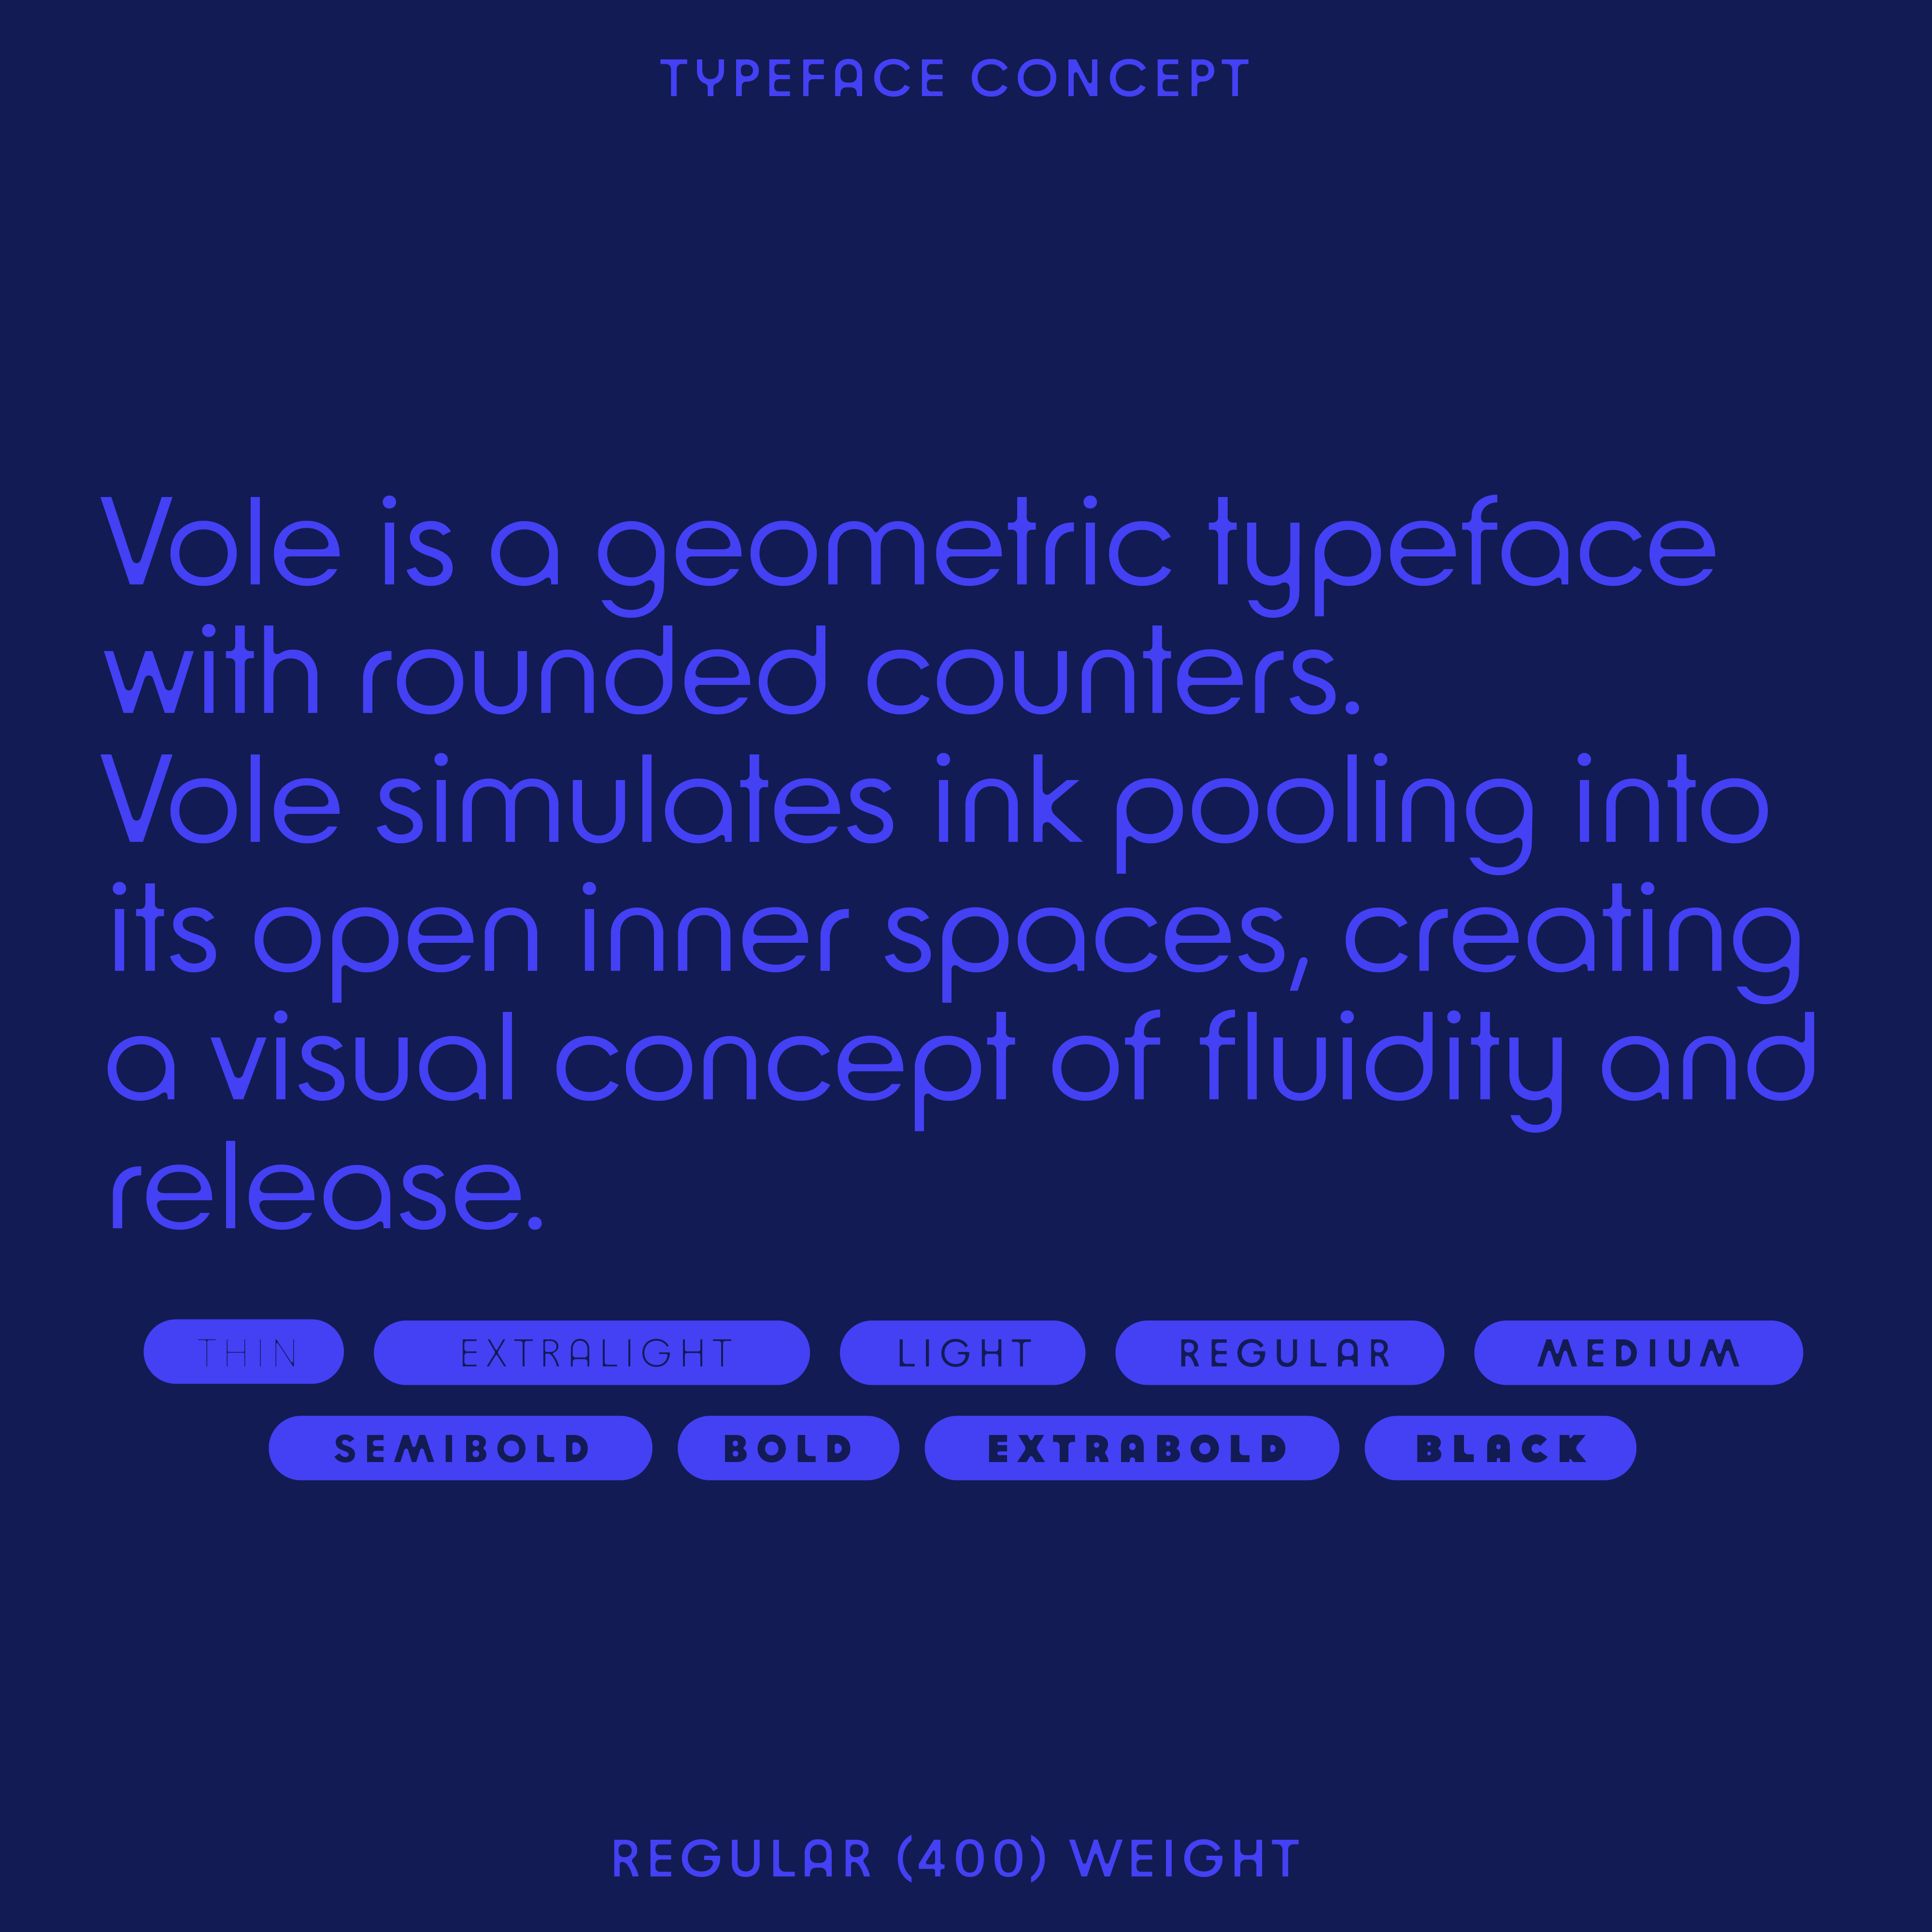 Vole font rounded counters, fluid